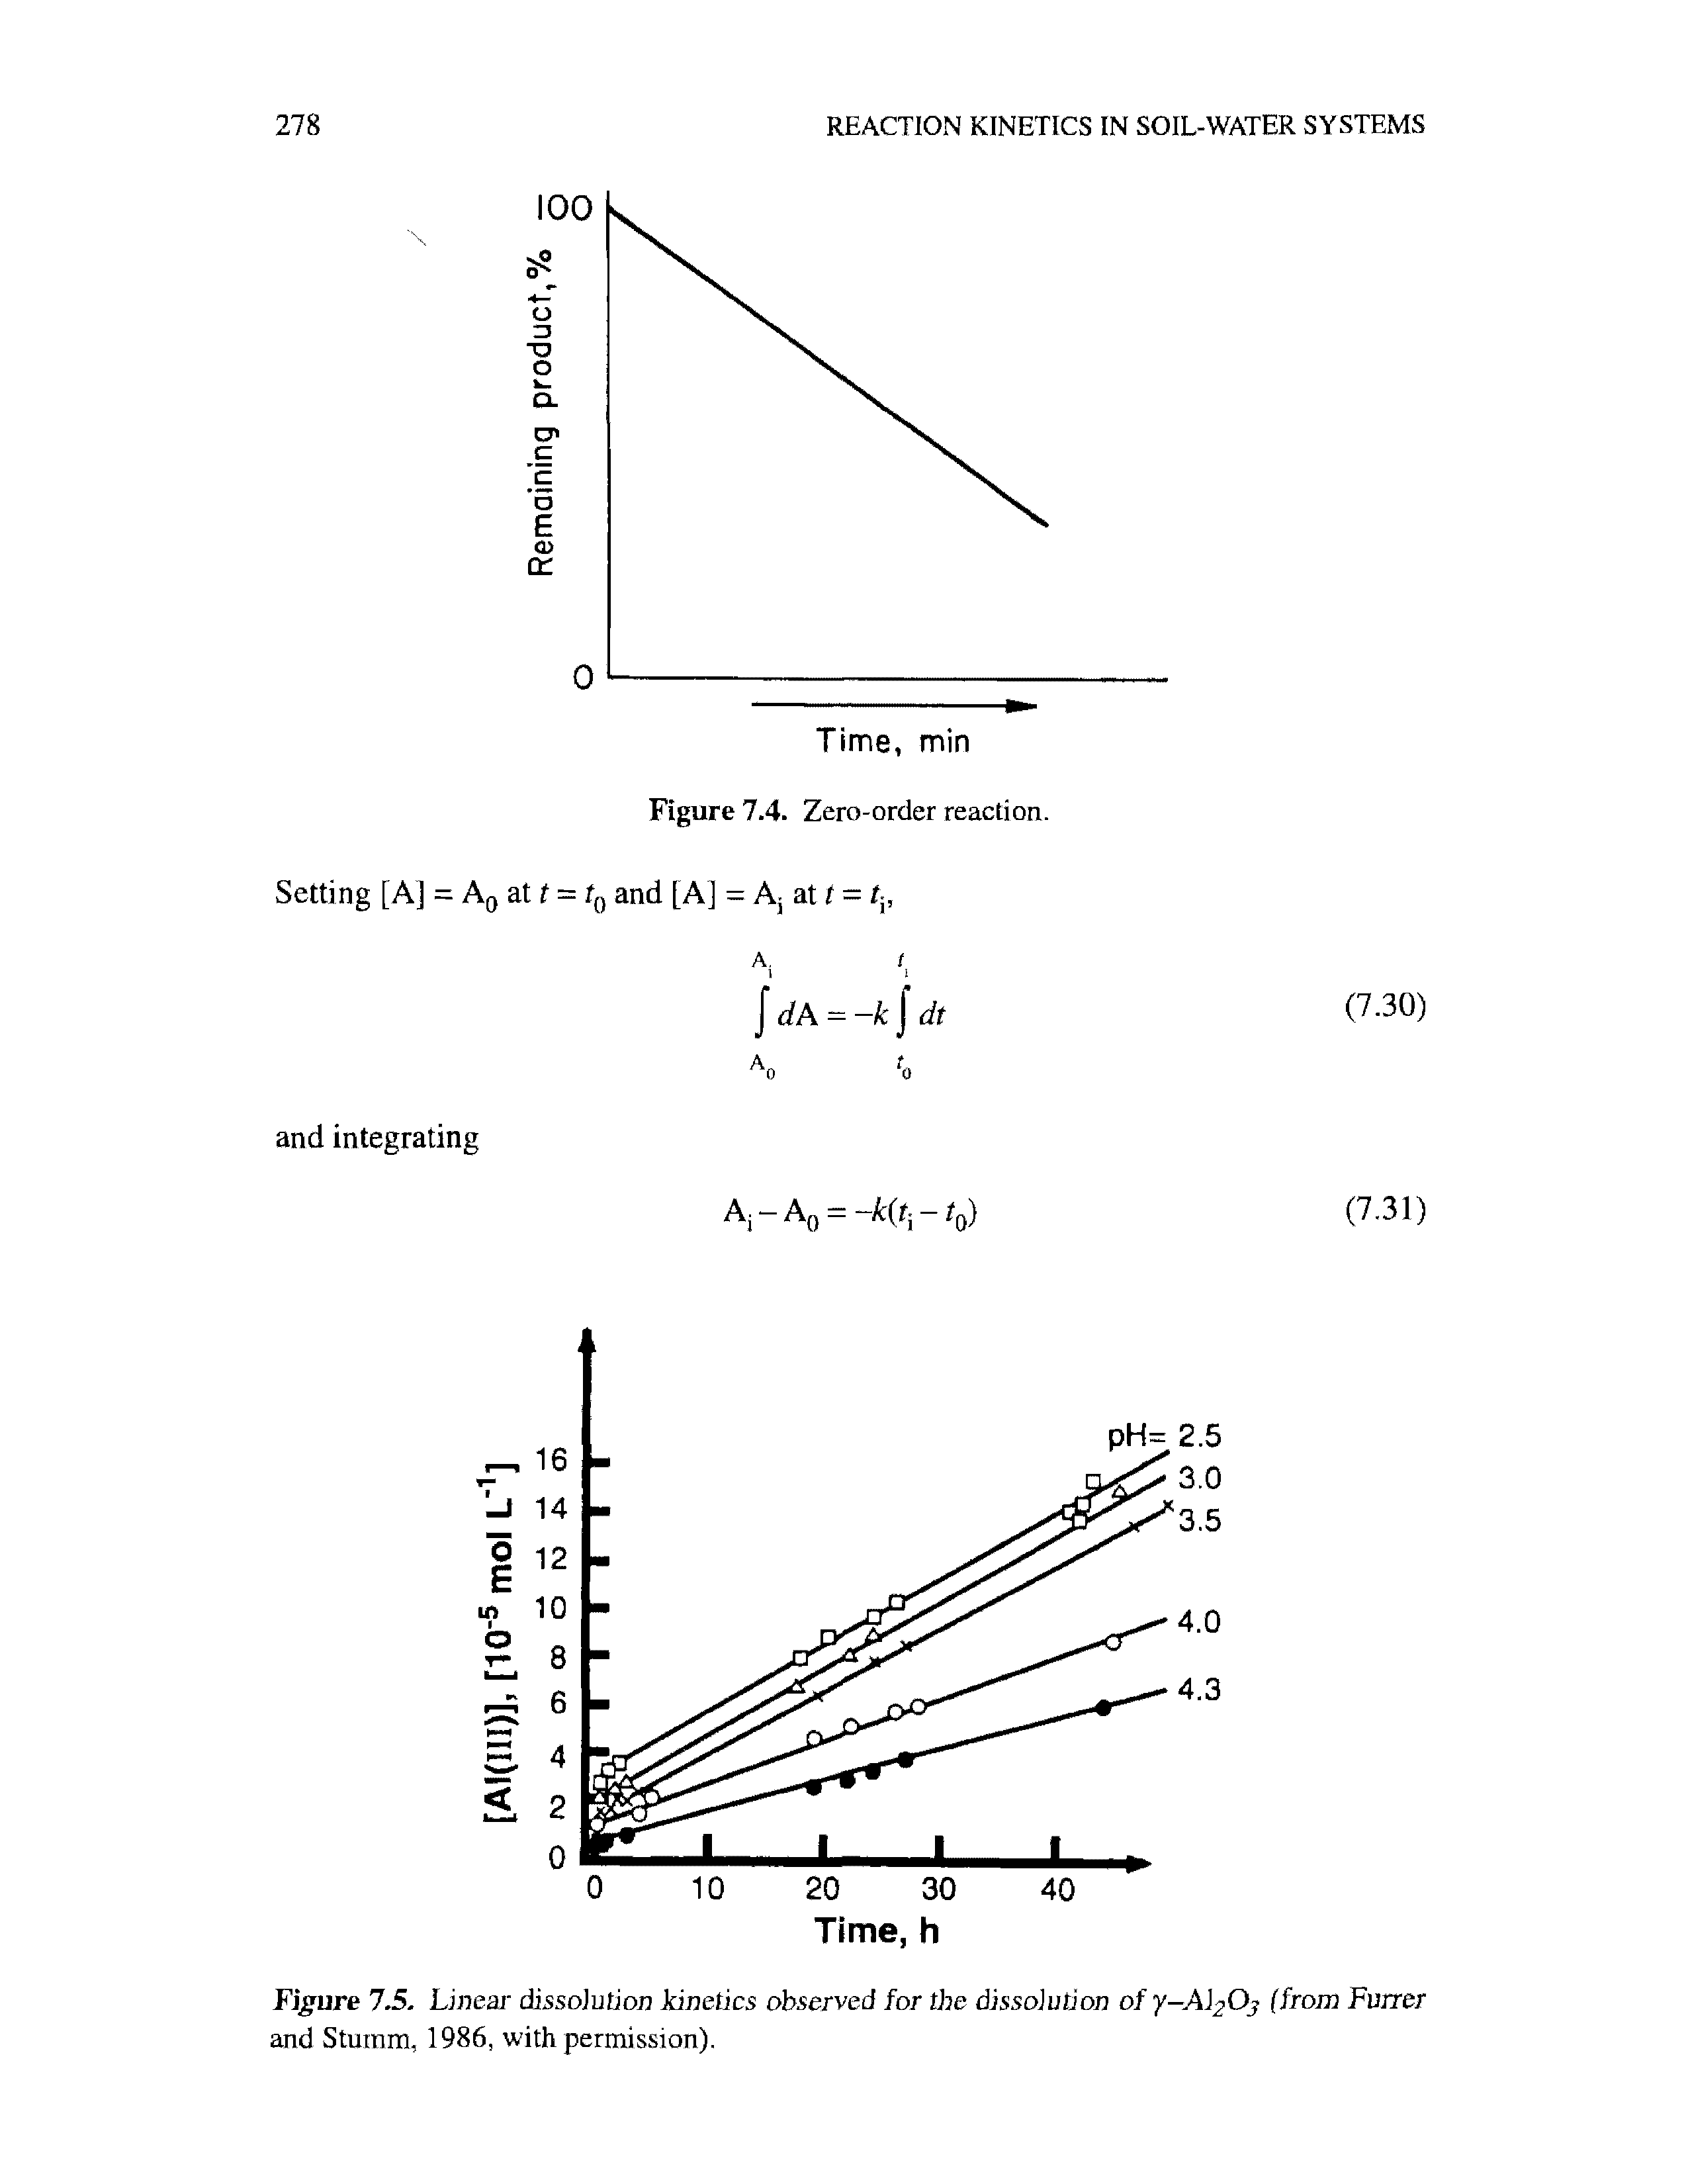 Figure 7.5. Linear dissolution kinetics observed for the dissoiution ofy-A Oj (from Fvrrer and Stumm, 1986, with permission).